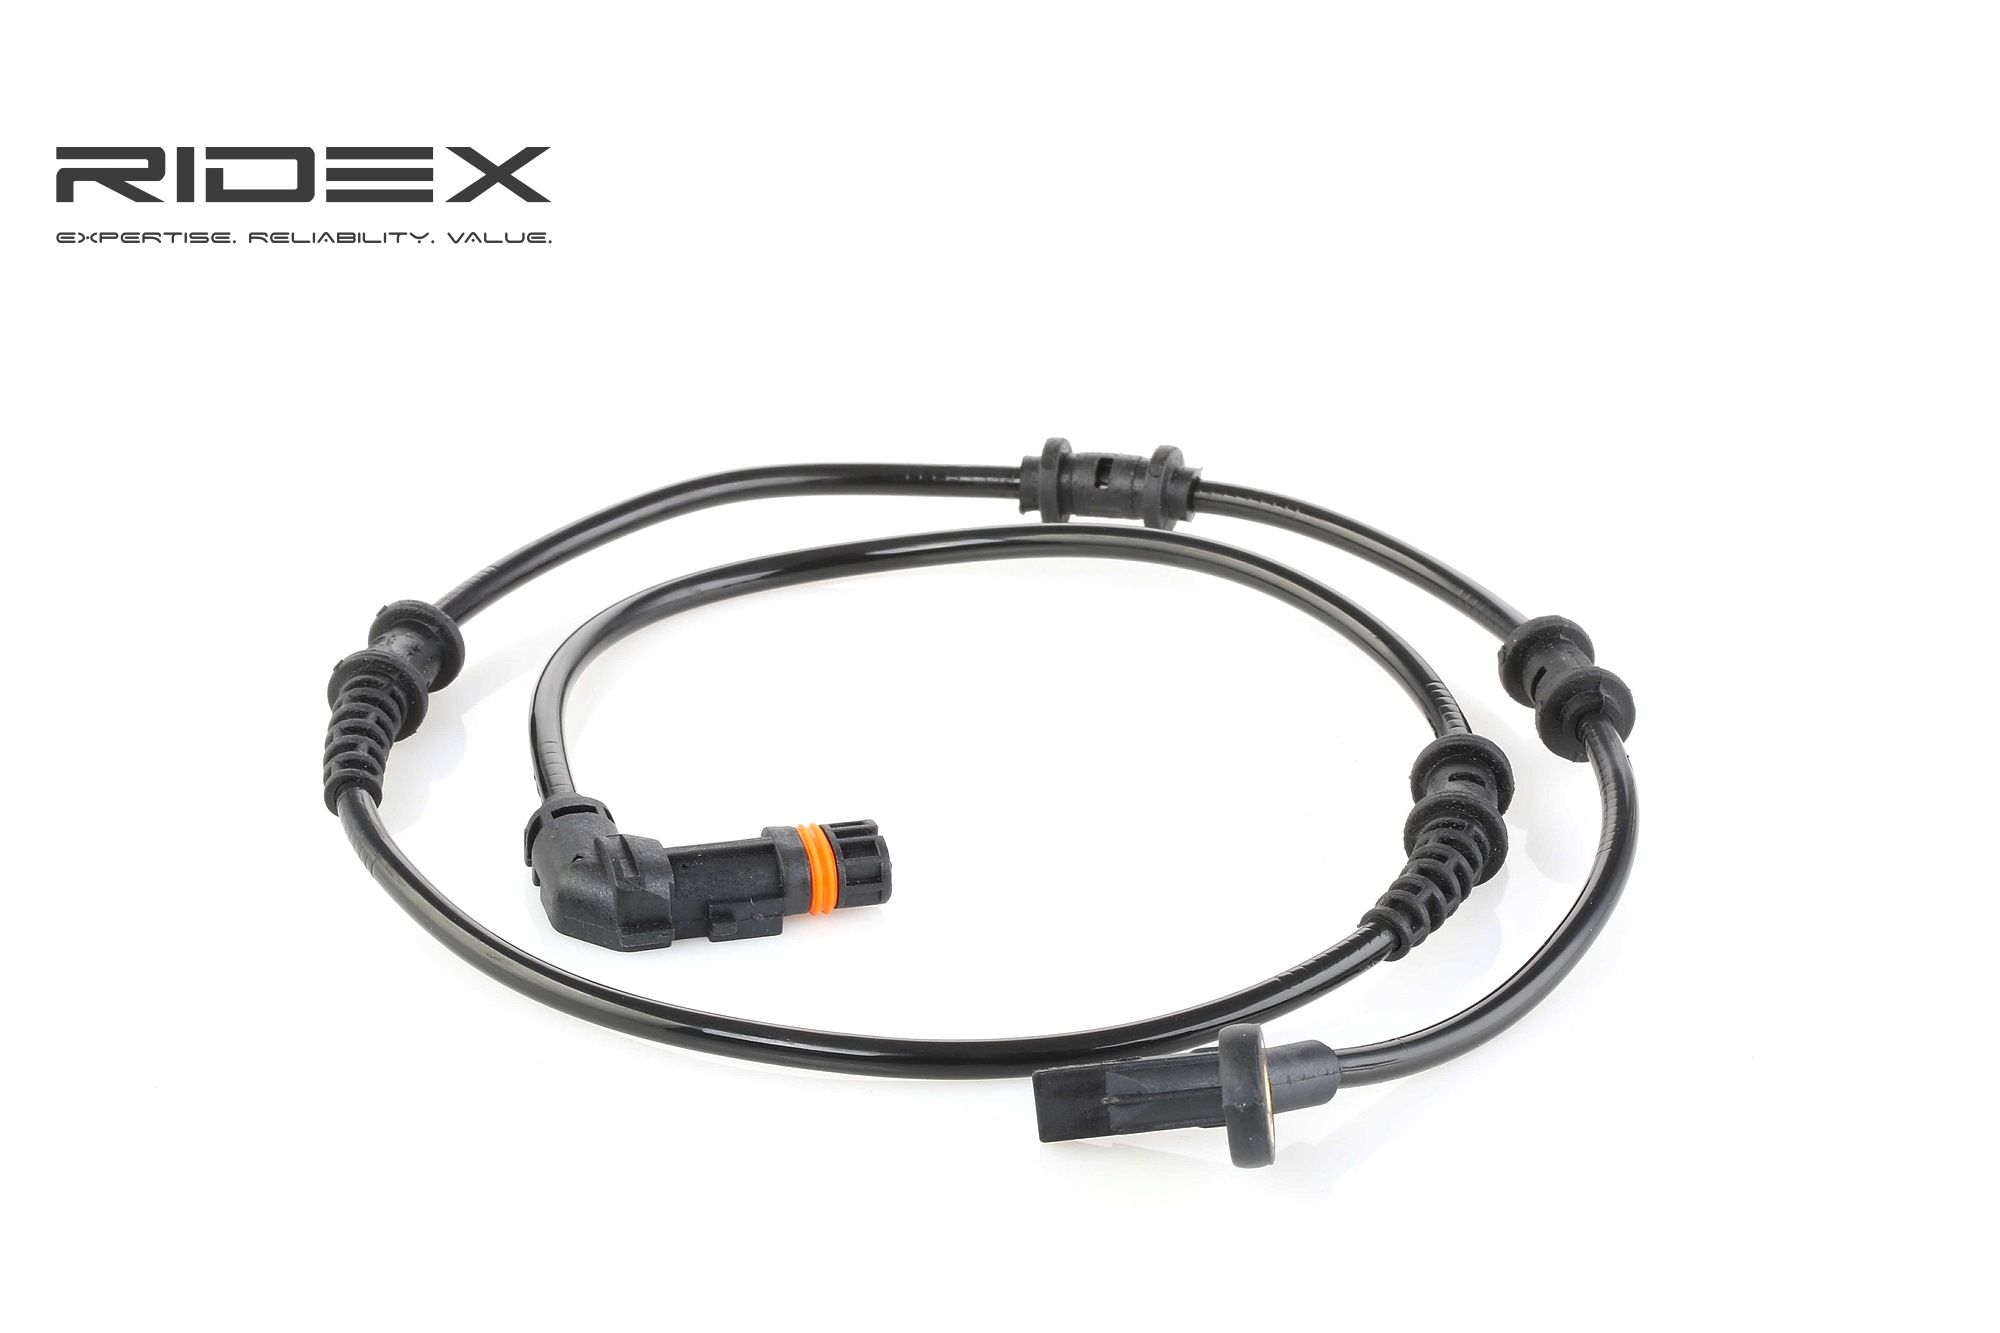 RIDEX 412W0166 ABS sensor Front axle both sides, for vehicles with ABS, Active sensor, 2-pin connector, 830mm, 12V, Electric